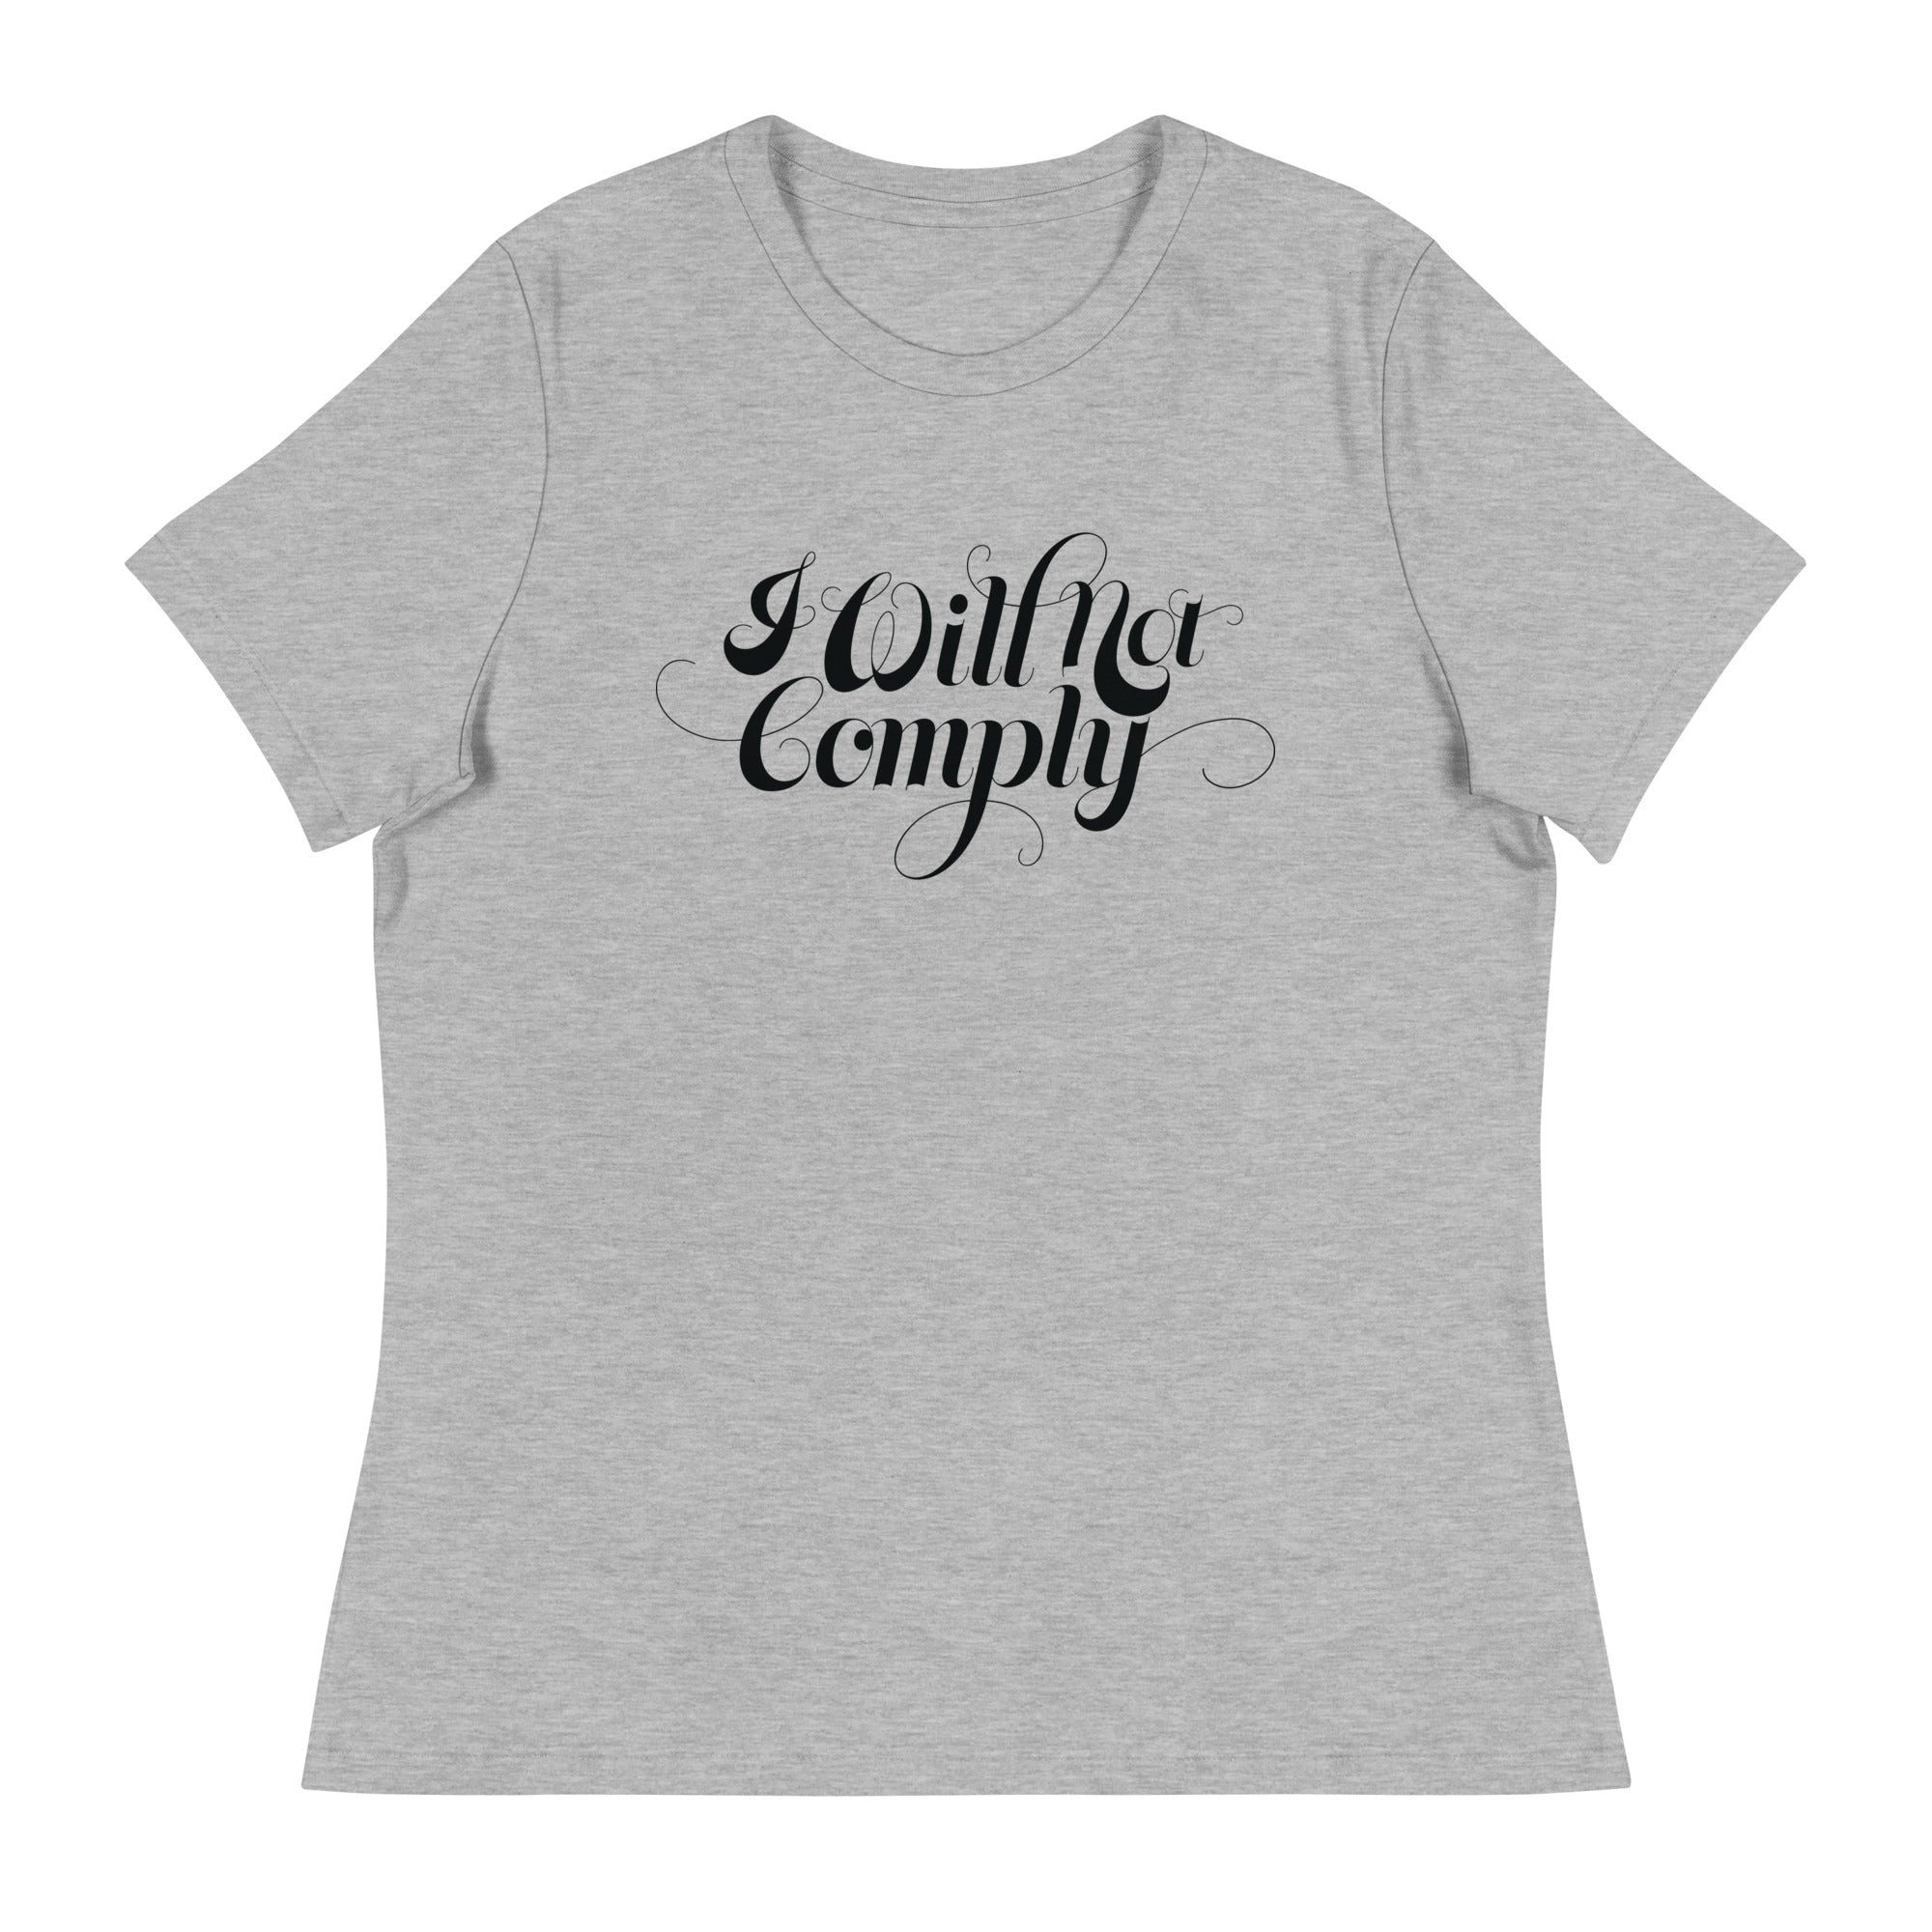 I Will Not Comply Women's Relaxed T-Shirt